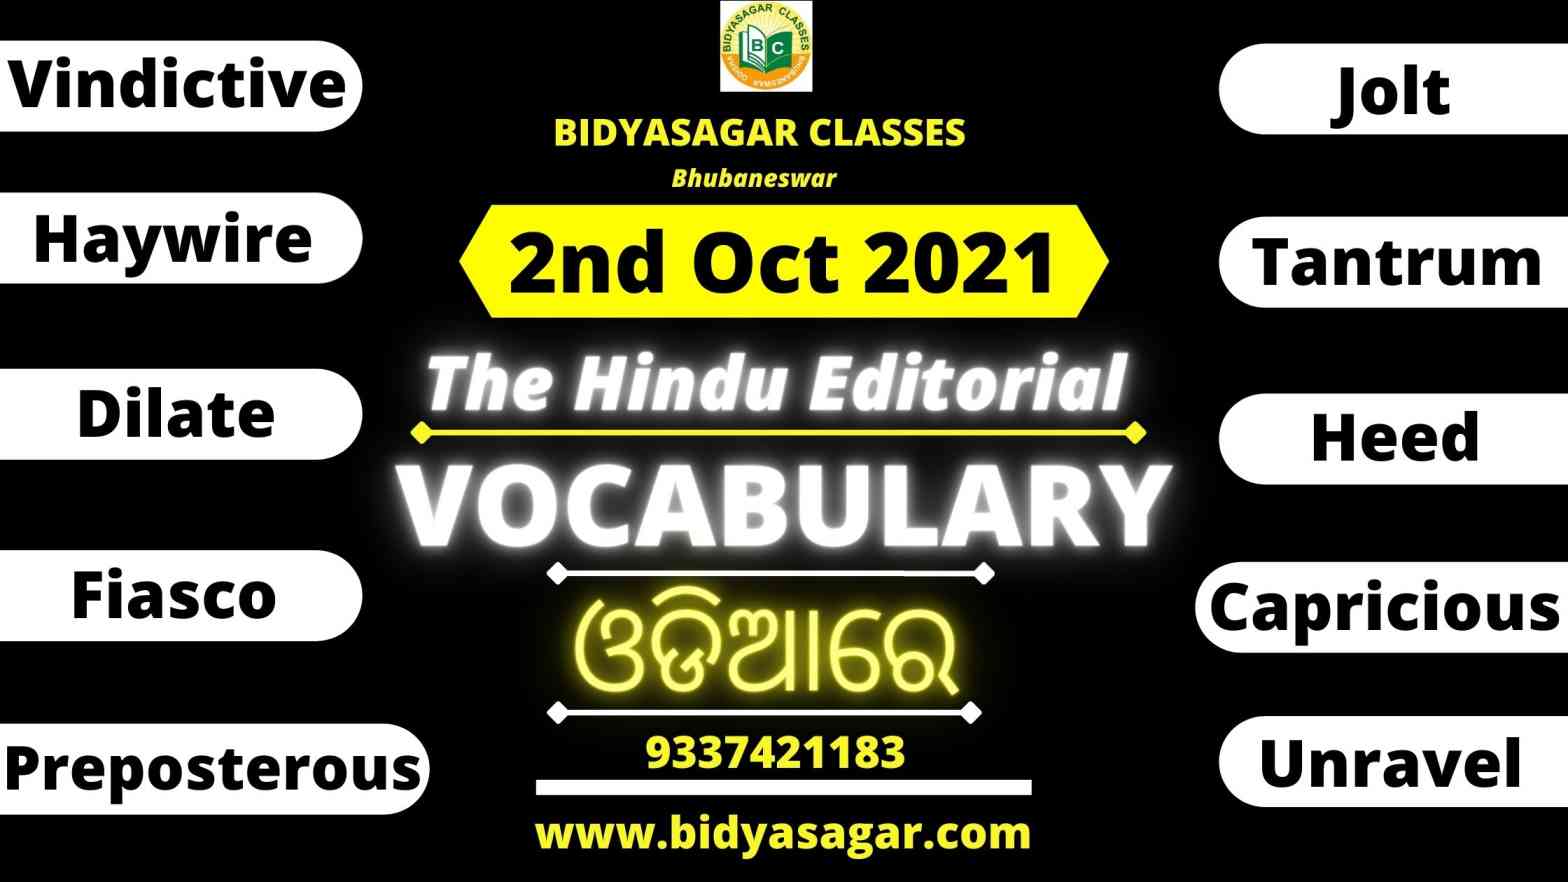 The Hindu Editorial Vocabulary of 2nd October 2021